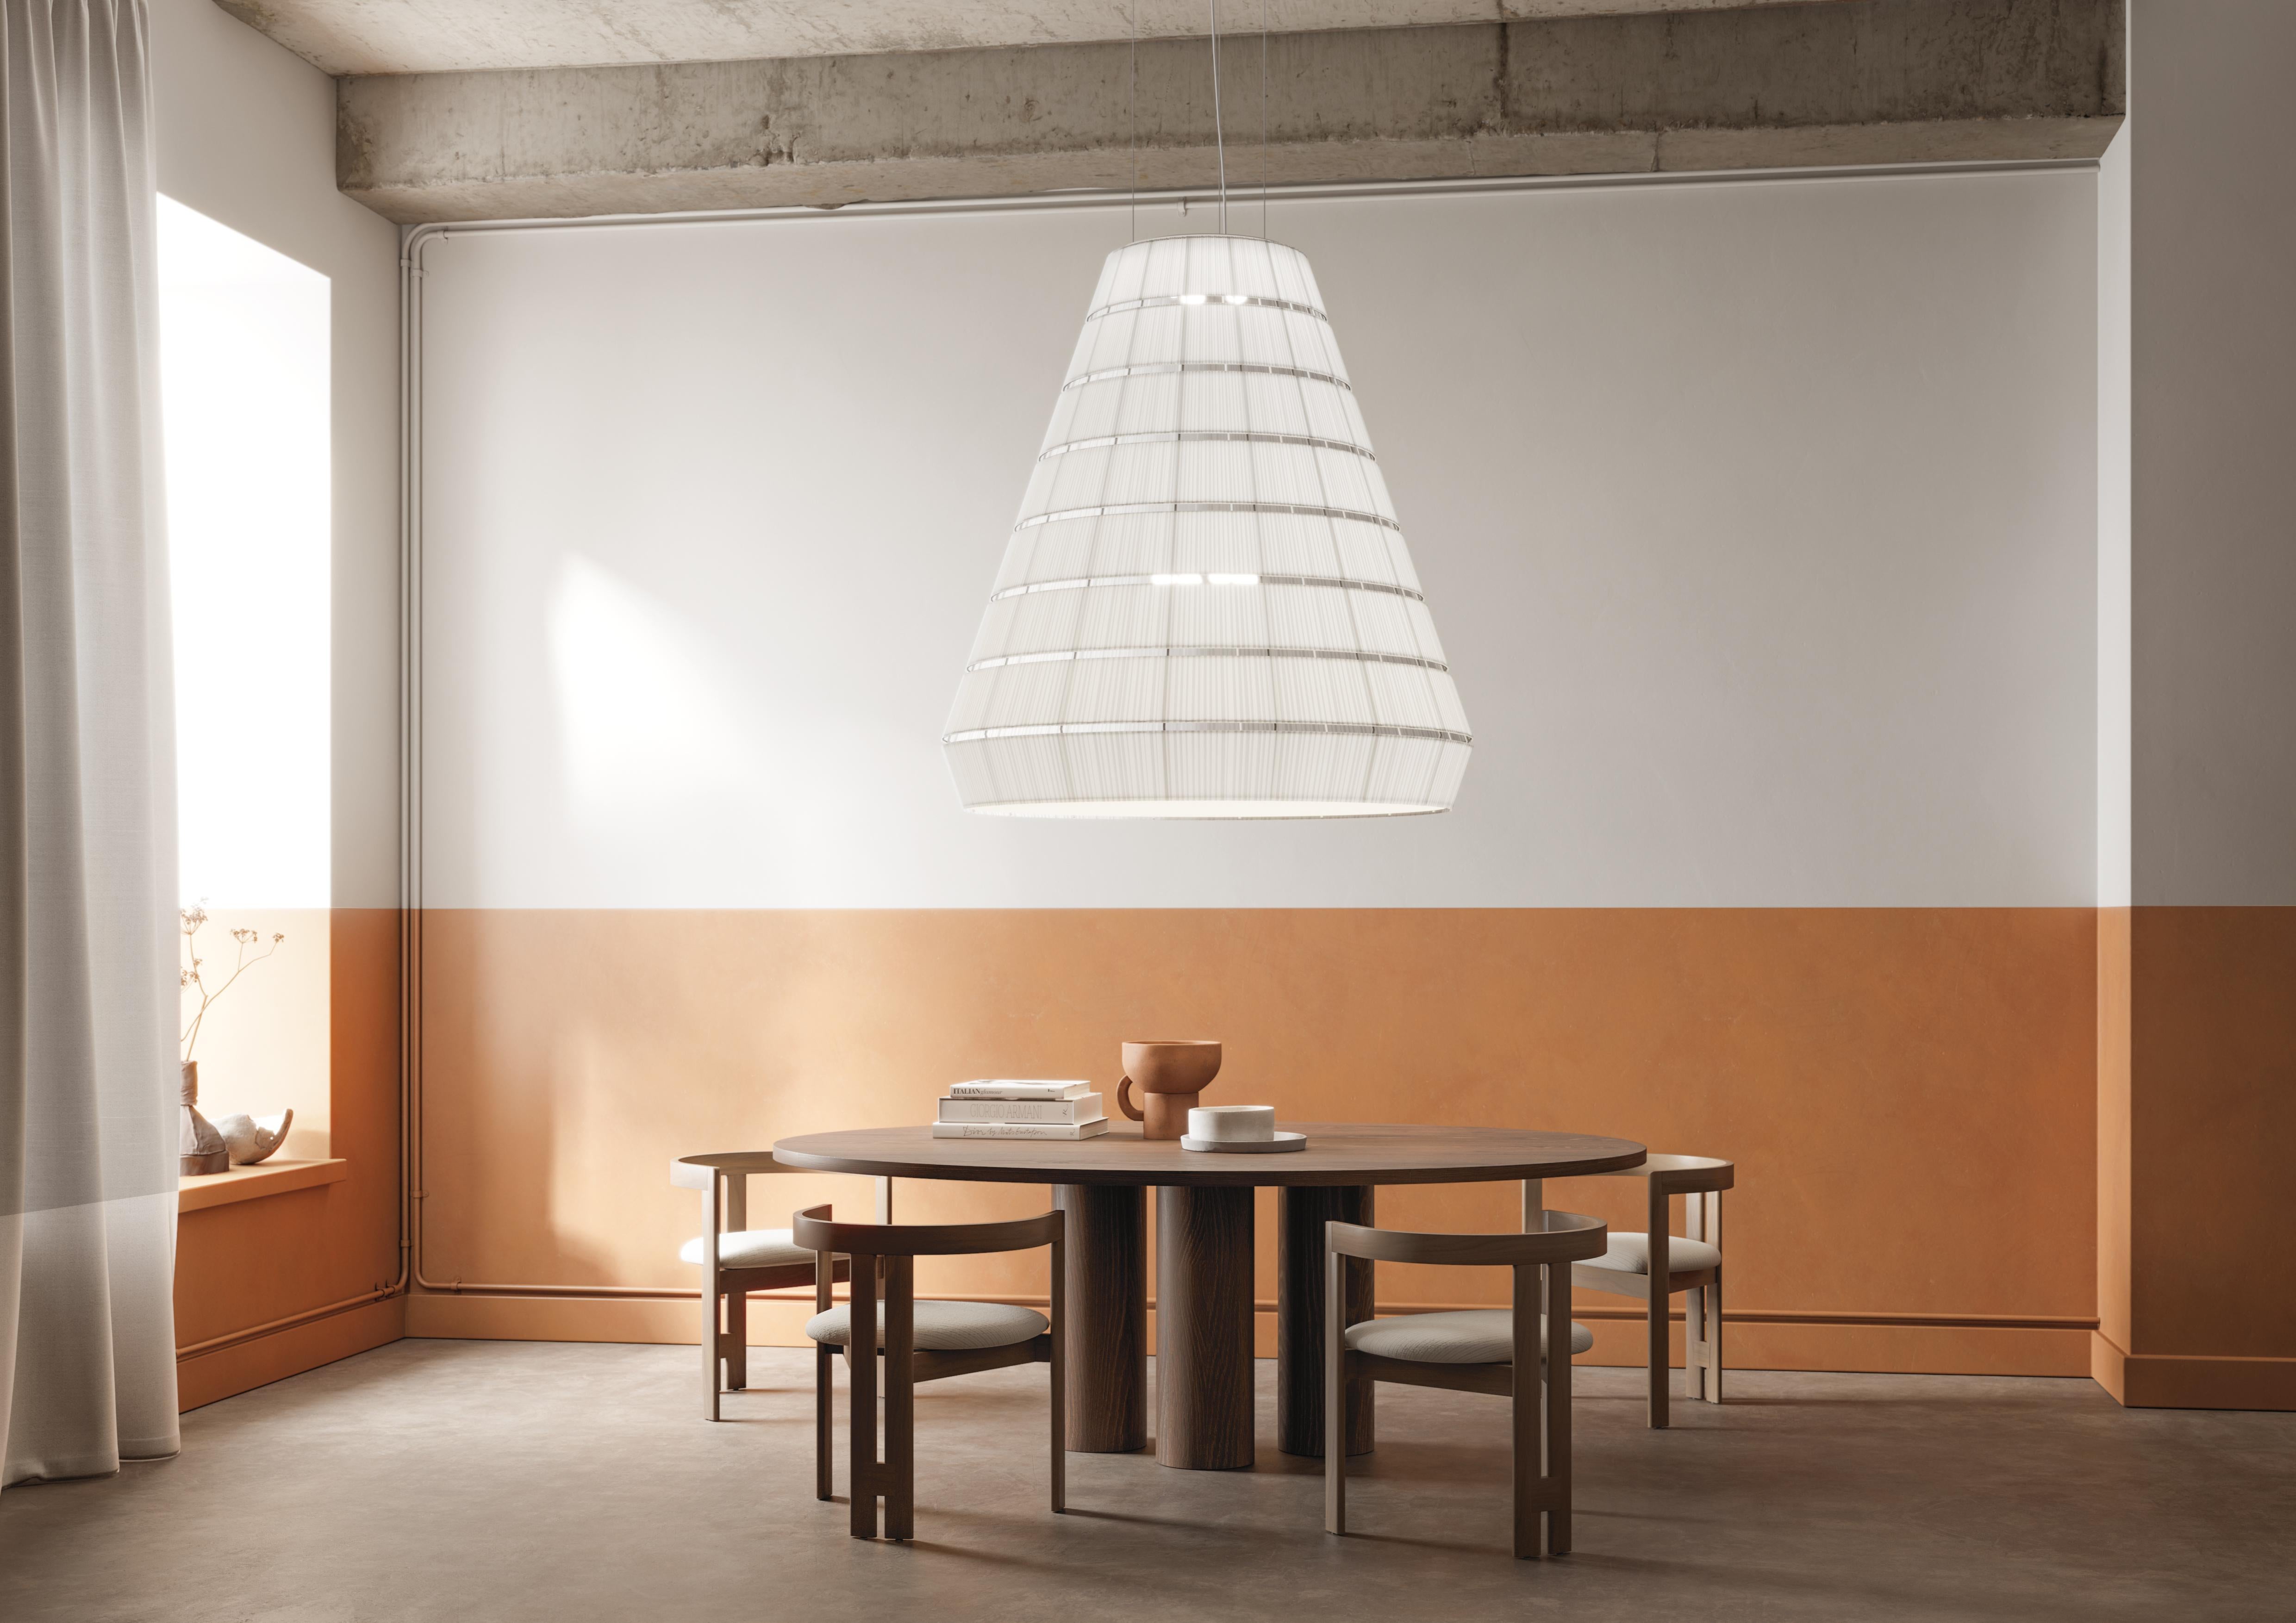 Axolight Layers Type C Pendant Lamp in White Steel by Vanessa Vivian

Layers is a collection of suspension lamps with a strong sculptural presence, obtained through combinations of different geometric shapes. Its layered system is modular, which